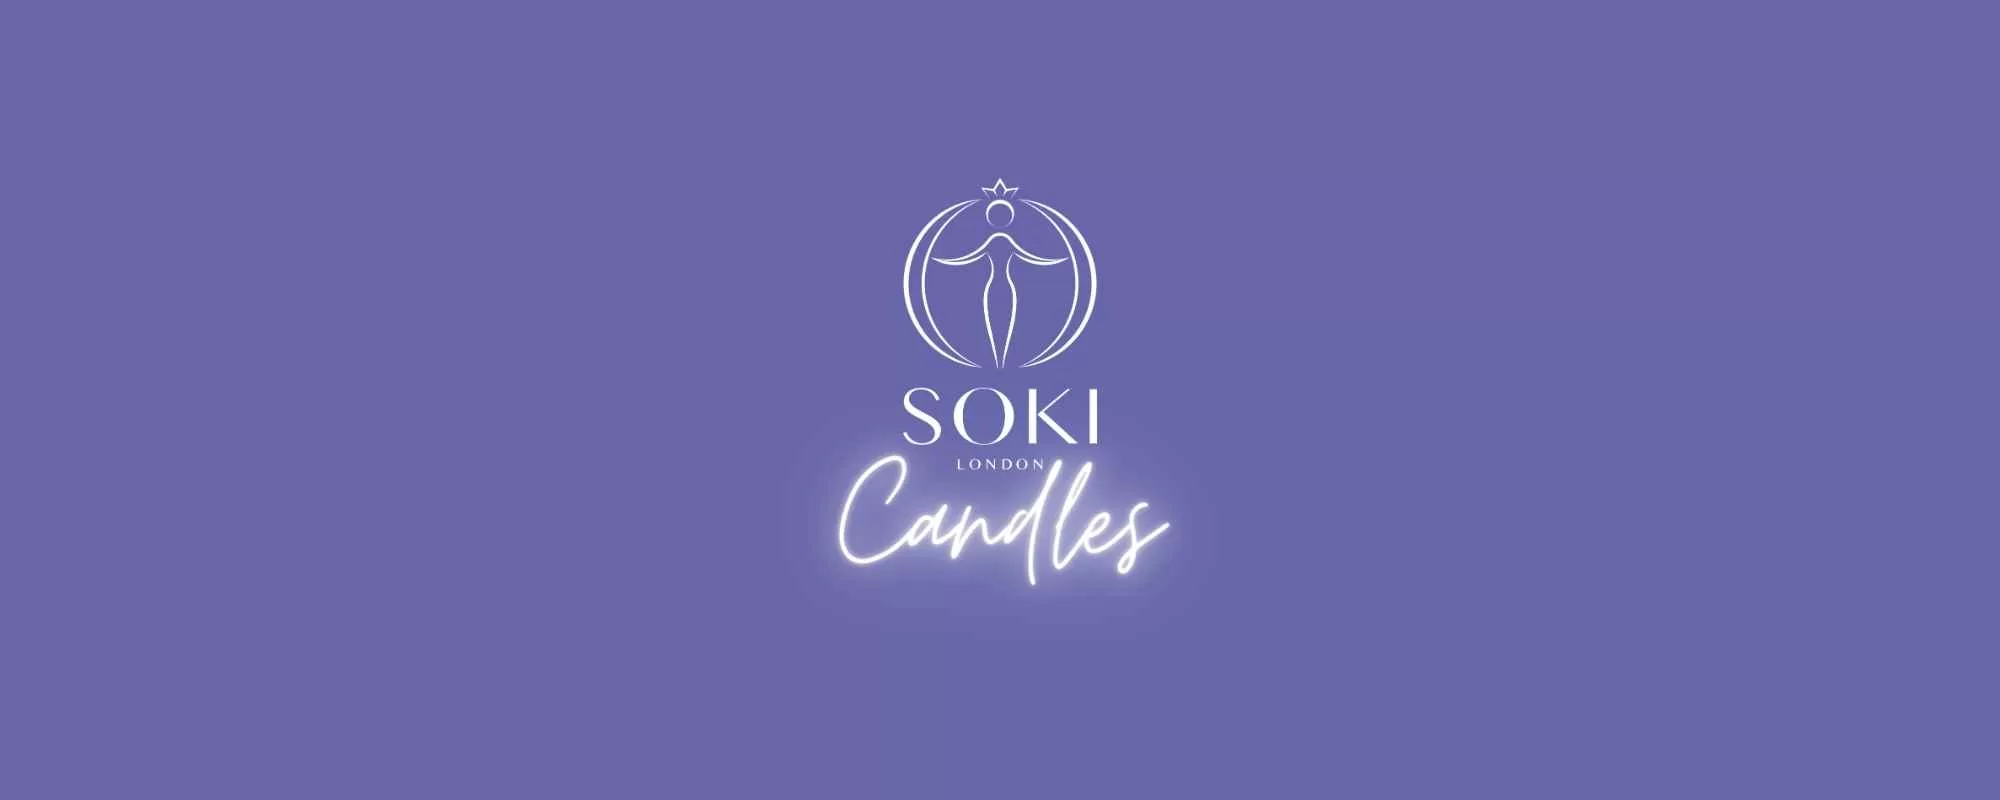 A Guide To The SOKI LONDON Candles